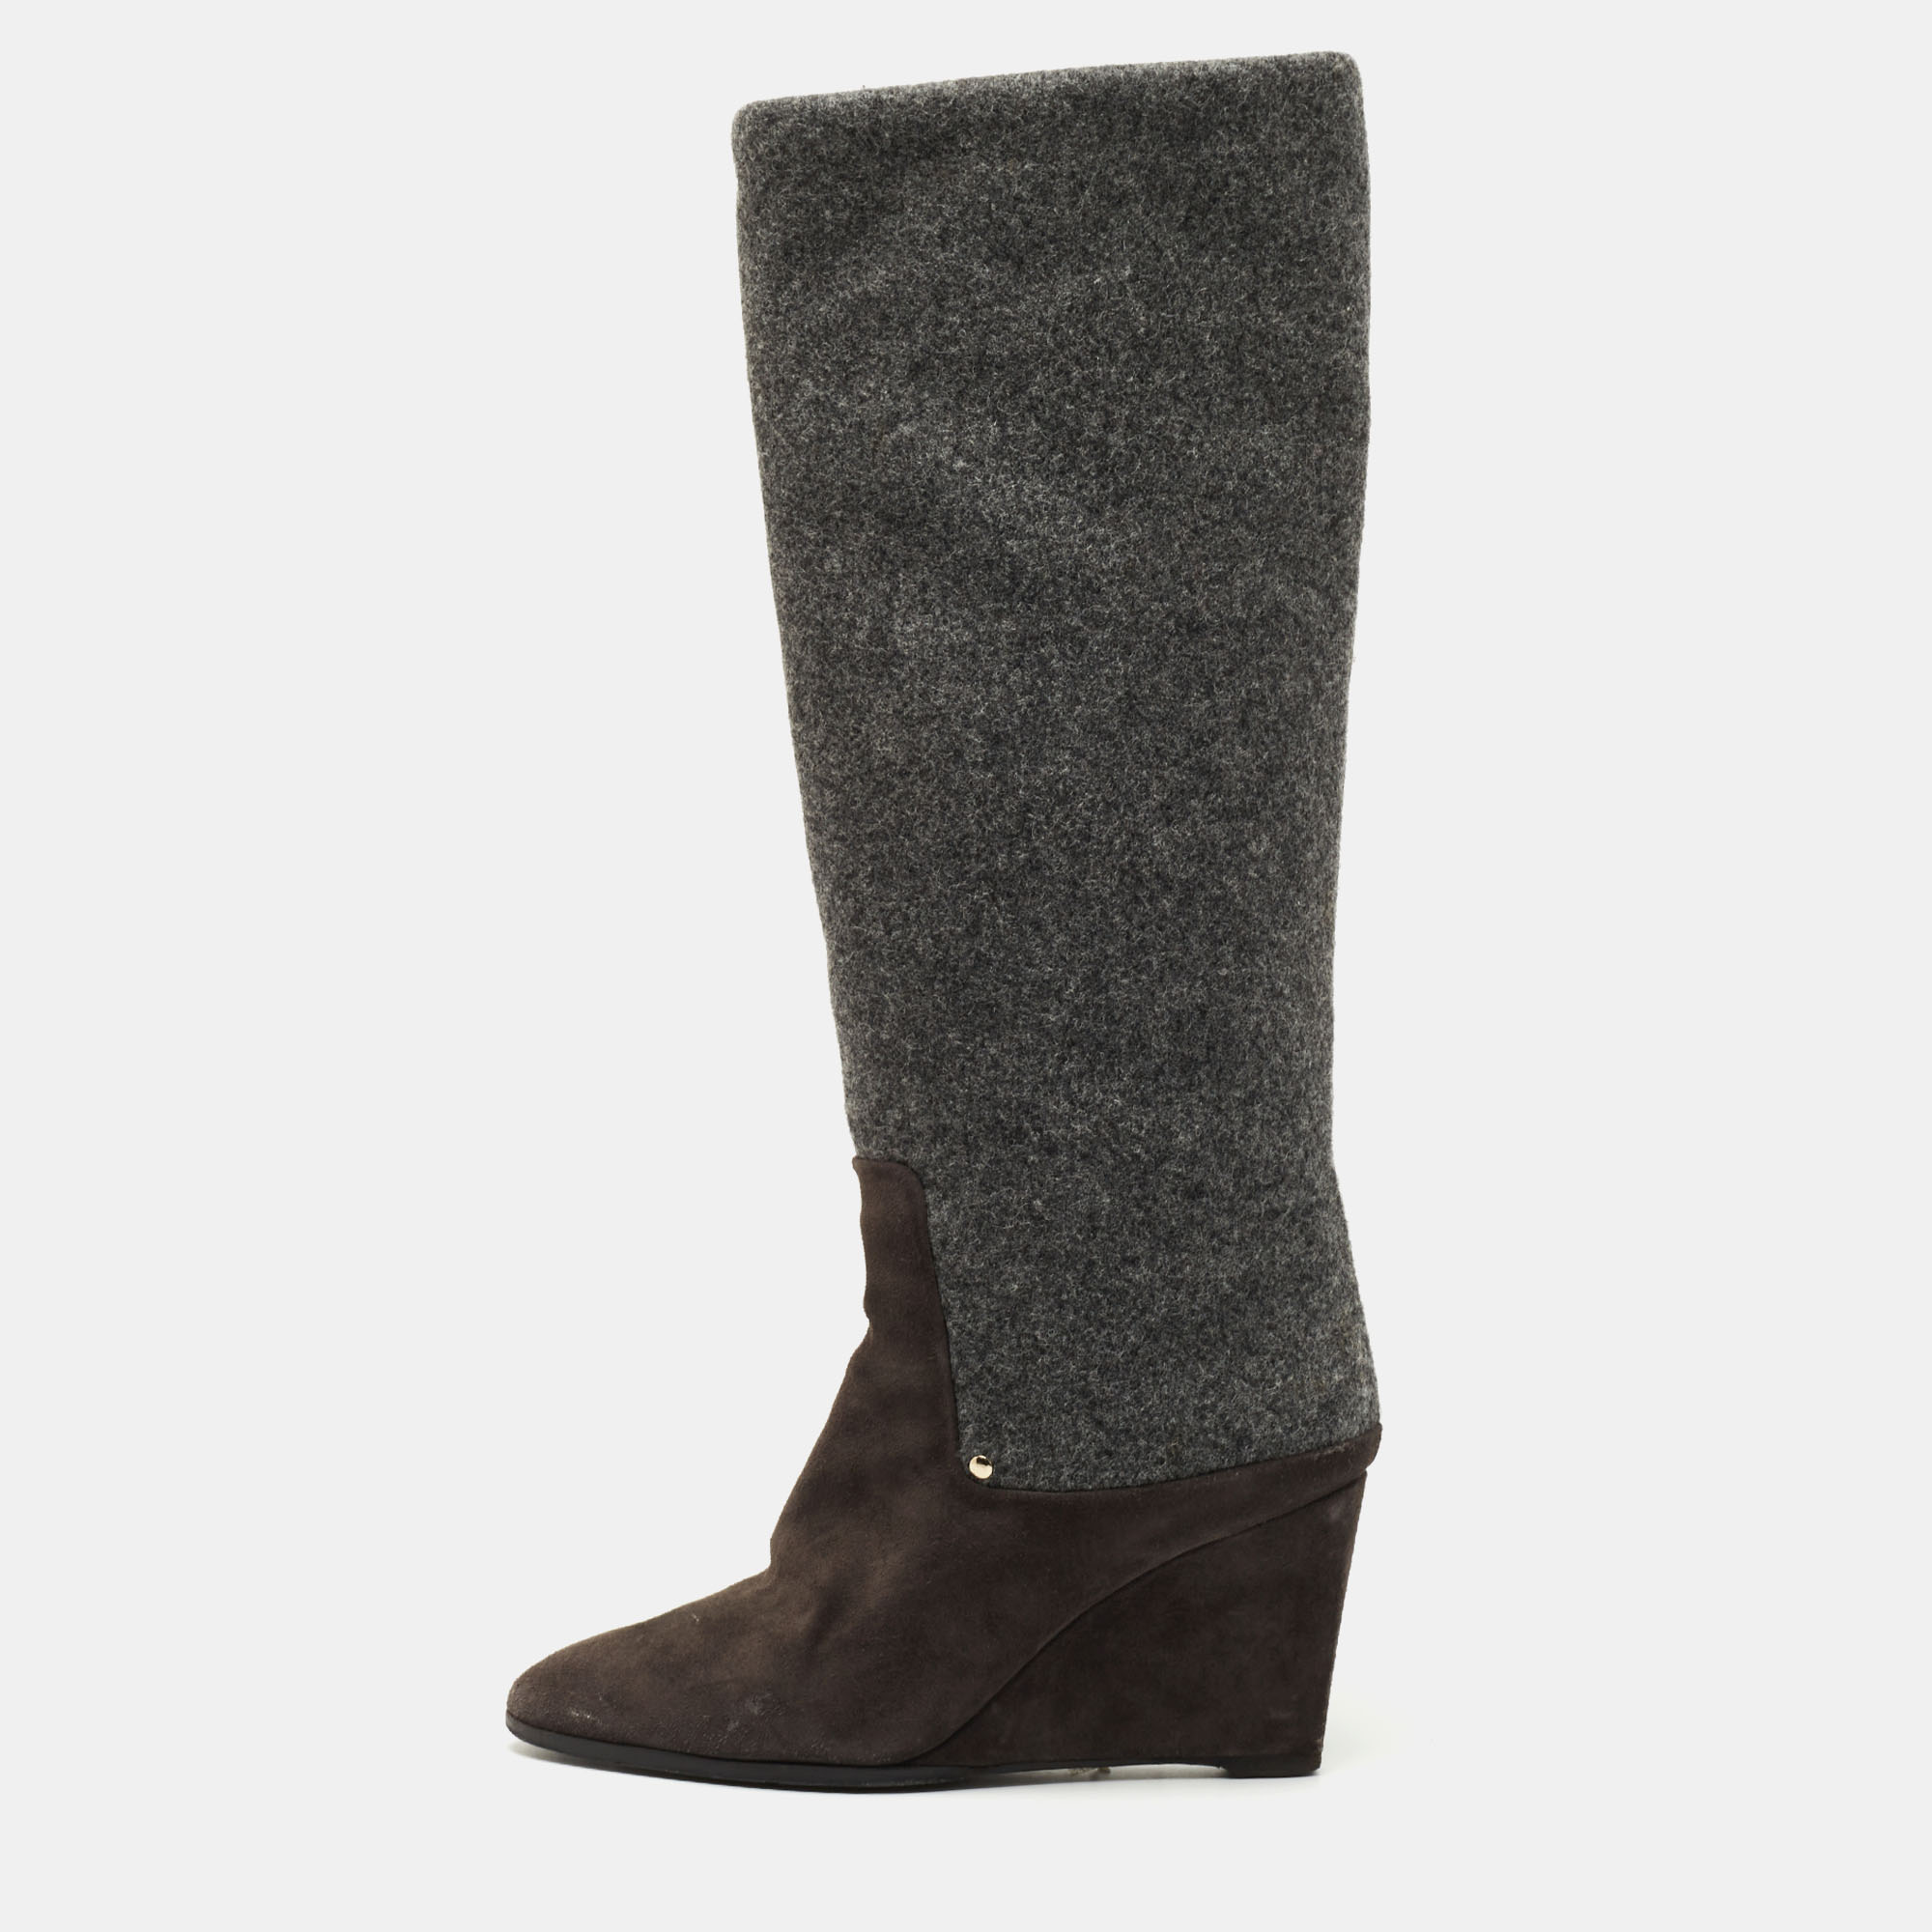 Boots are an essential part of your wardrobe and these boots crafted from top quality materials are a fine choice. Offering the best of comfort and style this sturdy soled pair would be great with a dress for a casual day out